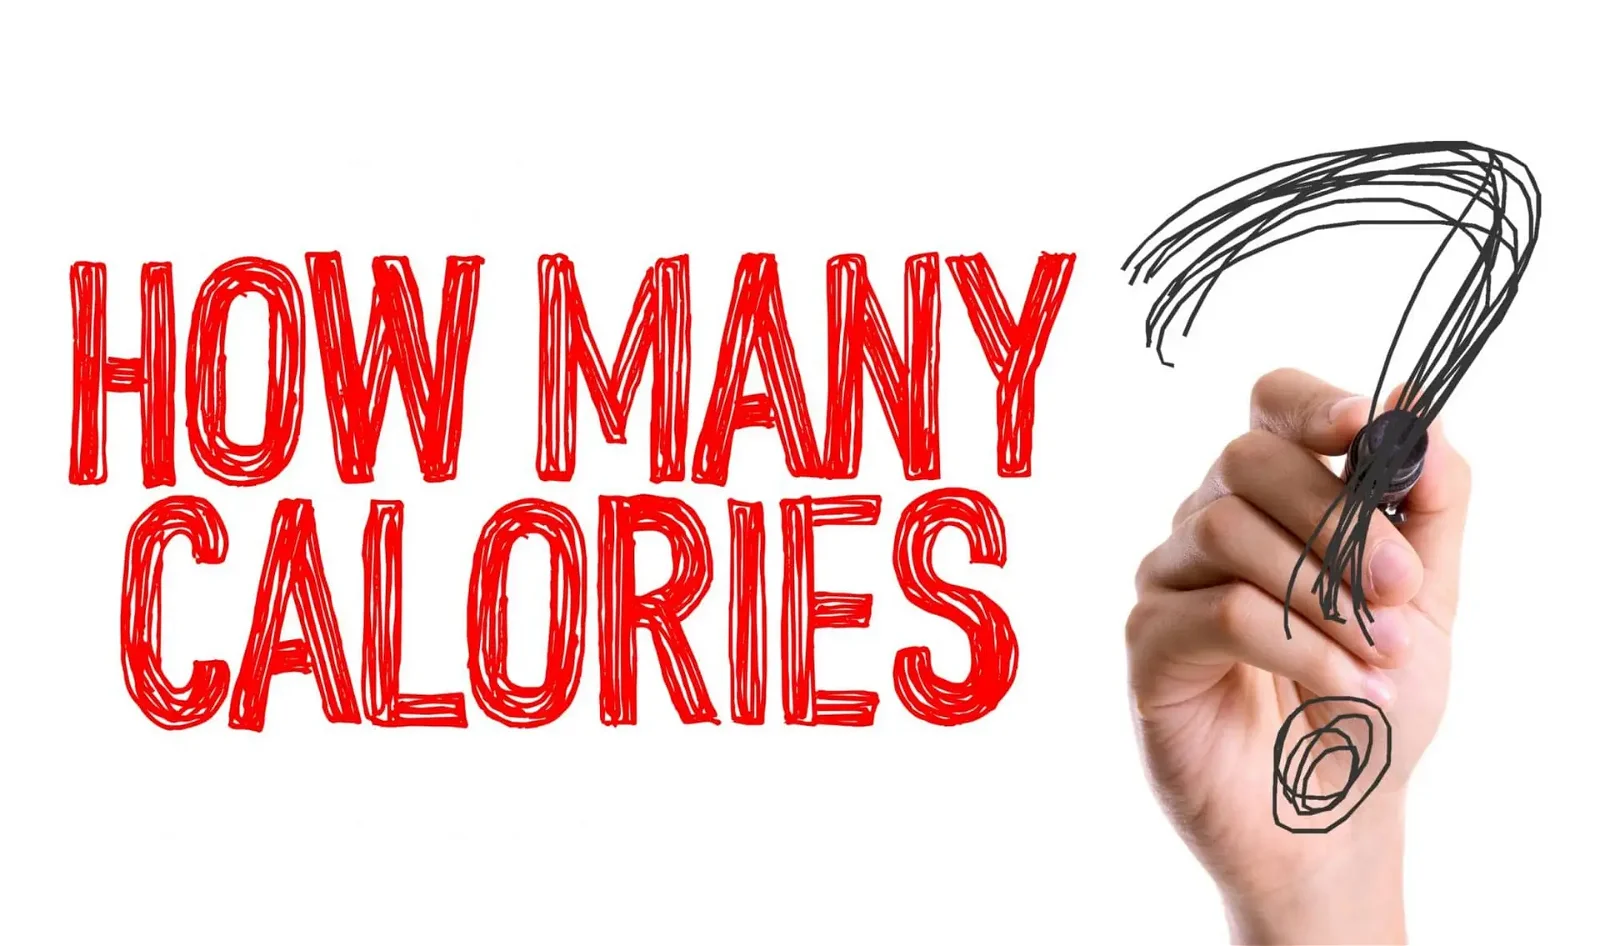 How many calories?